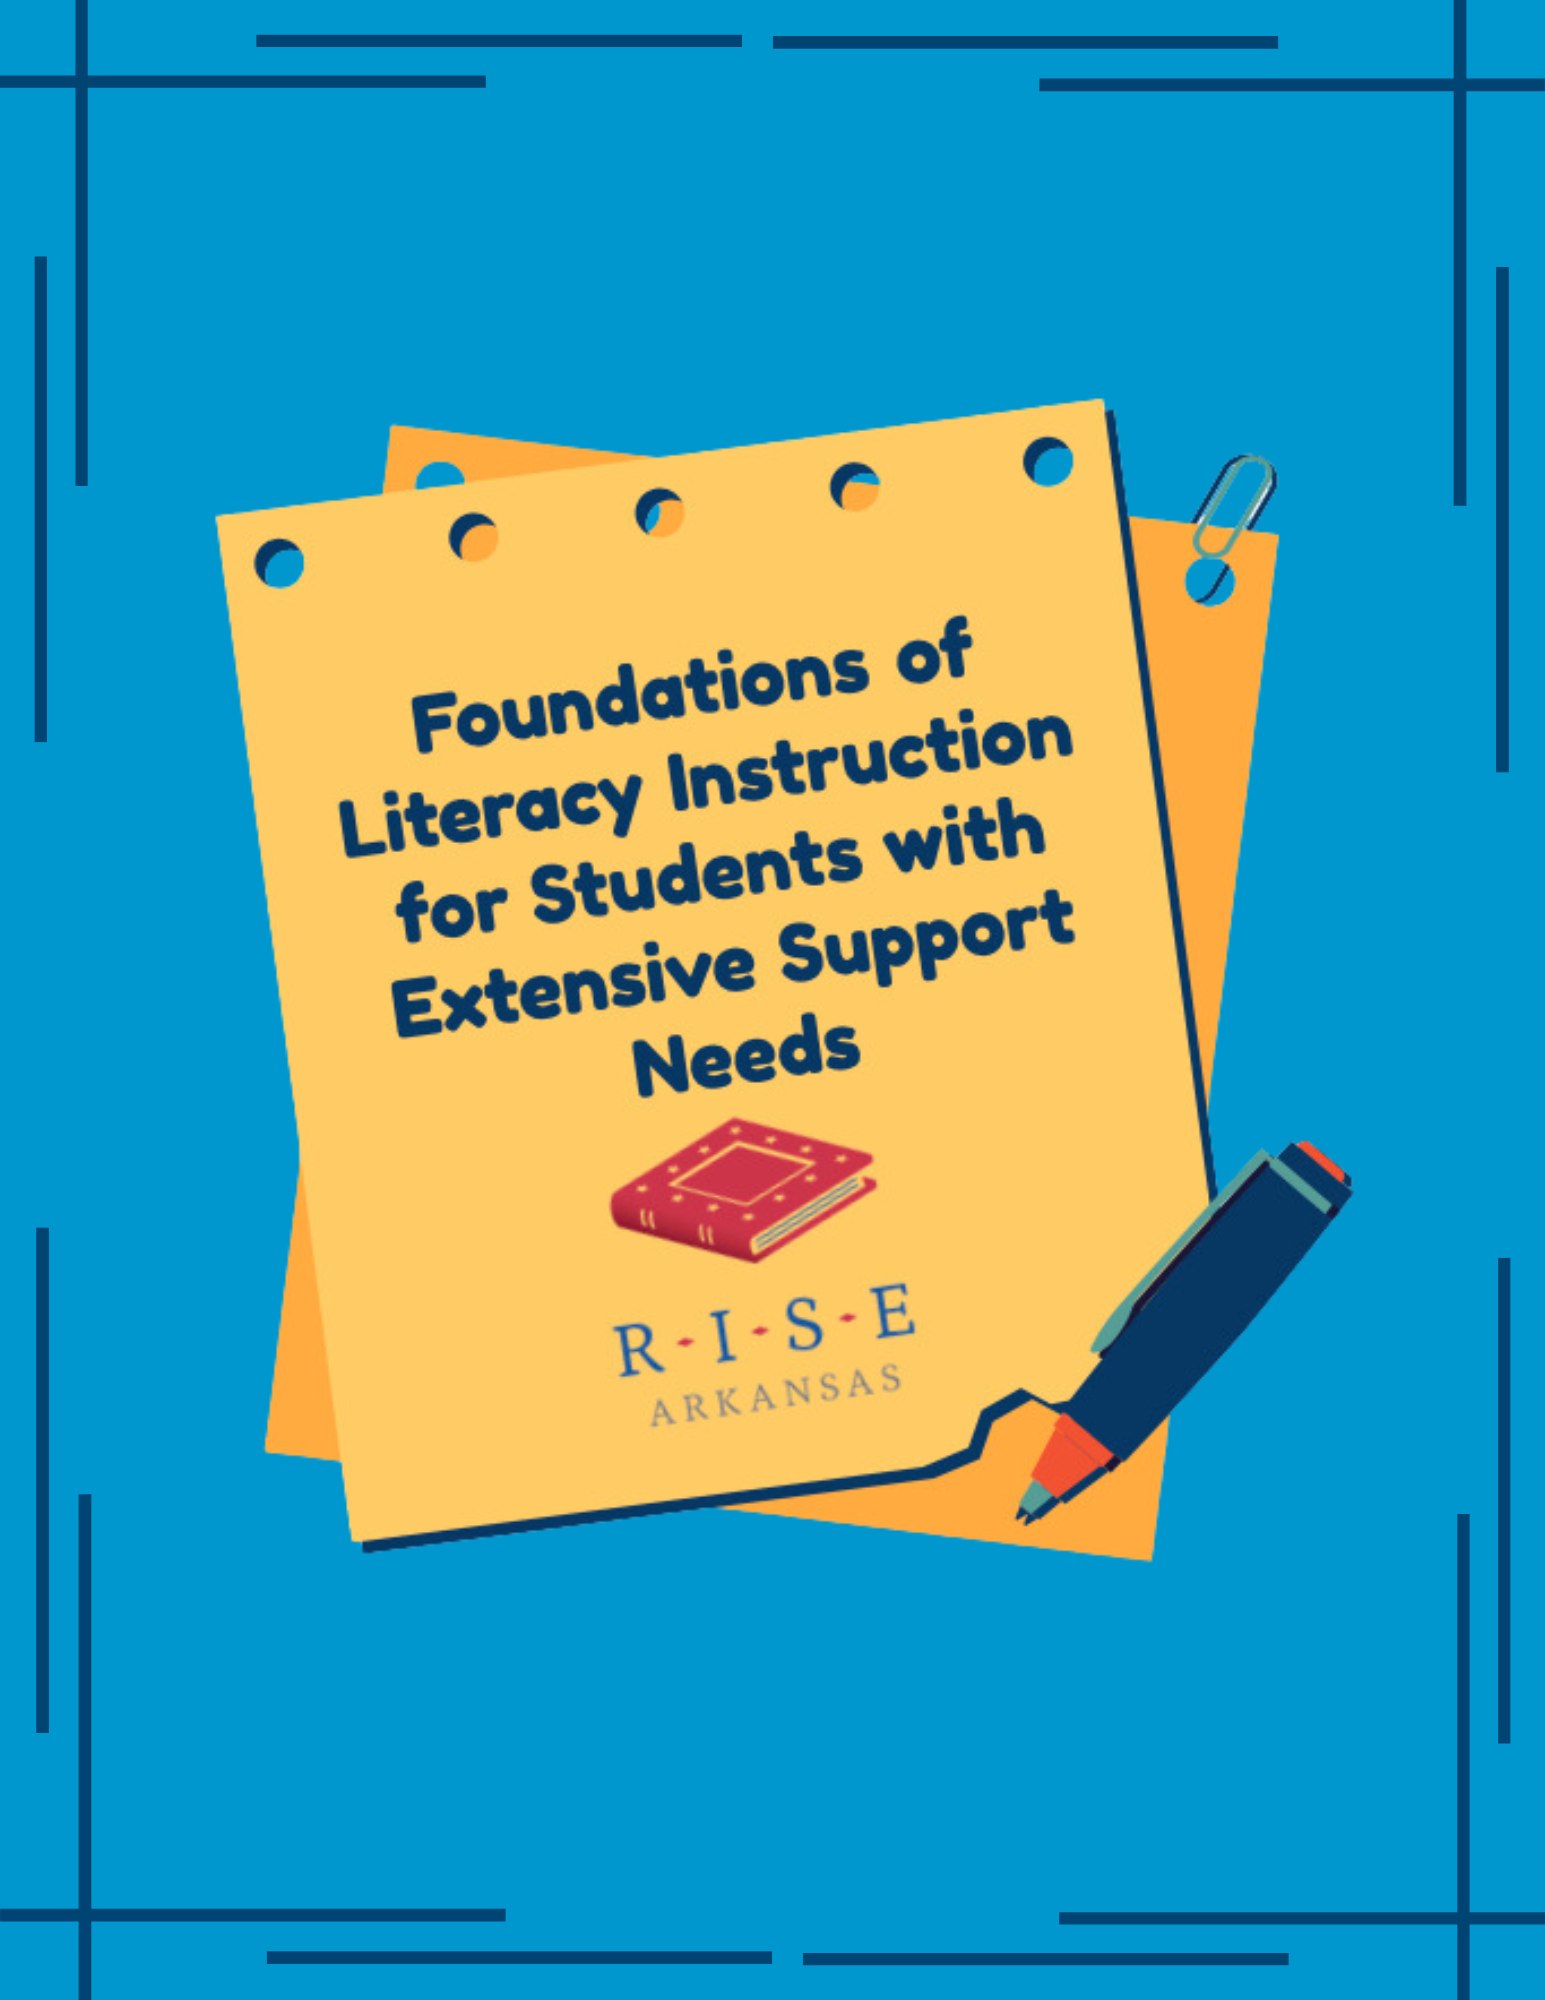 Foundations of Literacy Instruction for Students with Extensive Support Needs